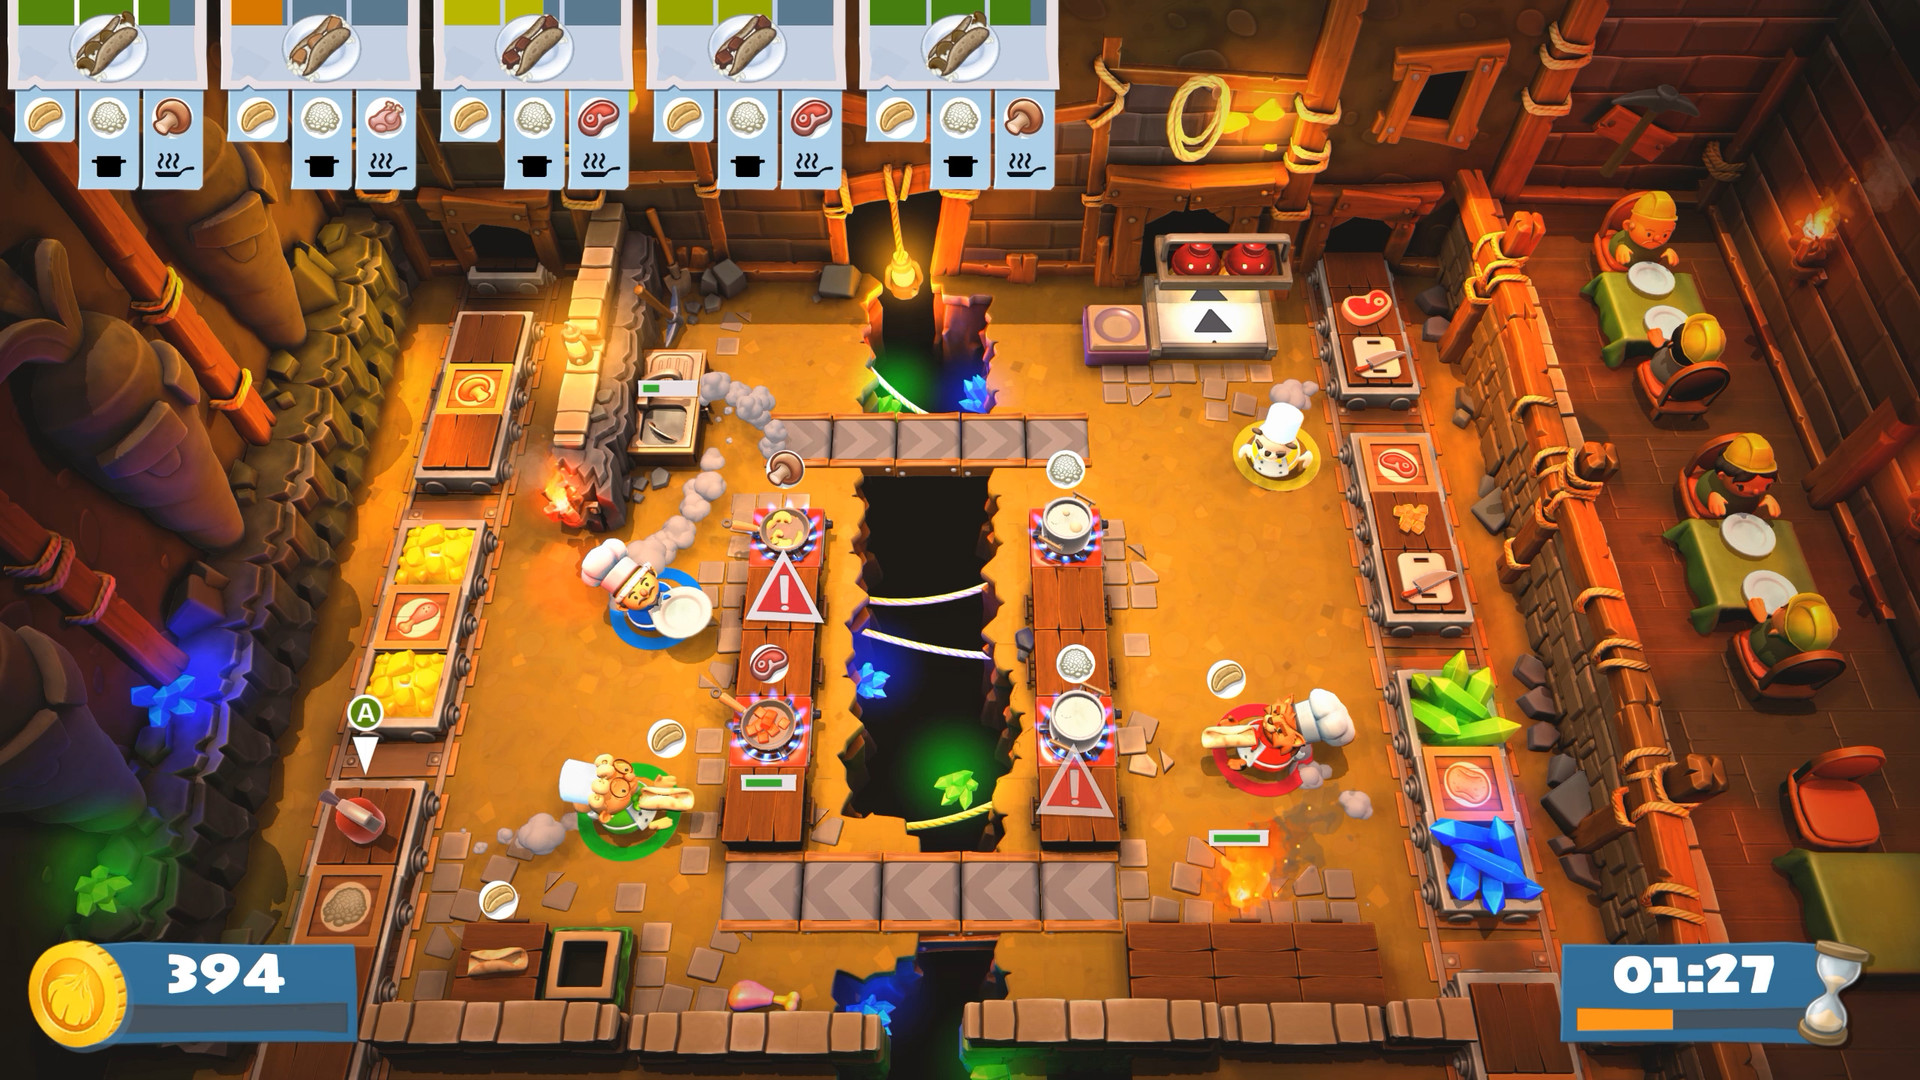 Overcooked! 2 on Steam
